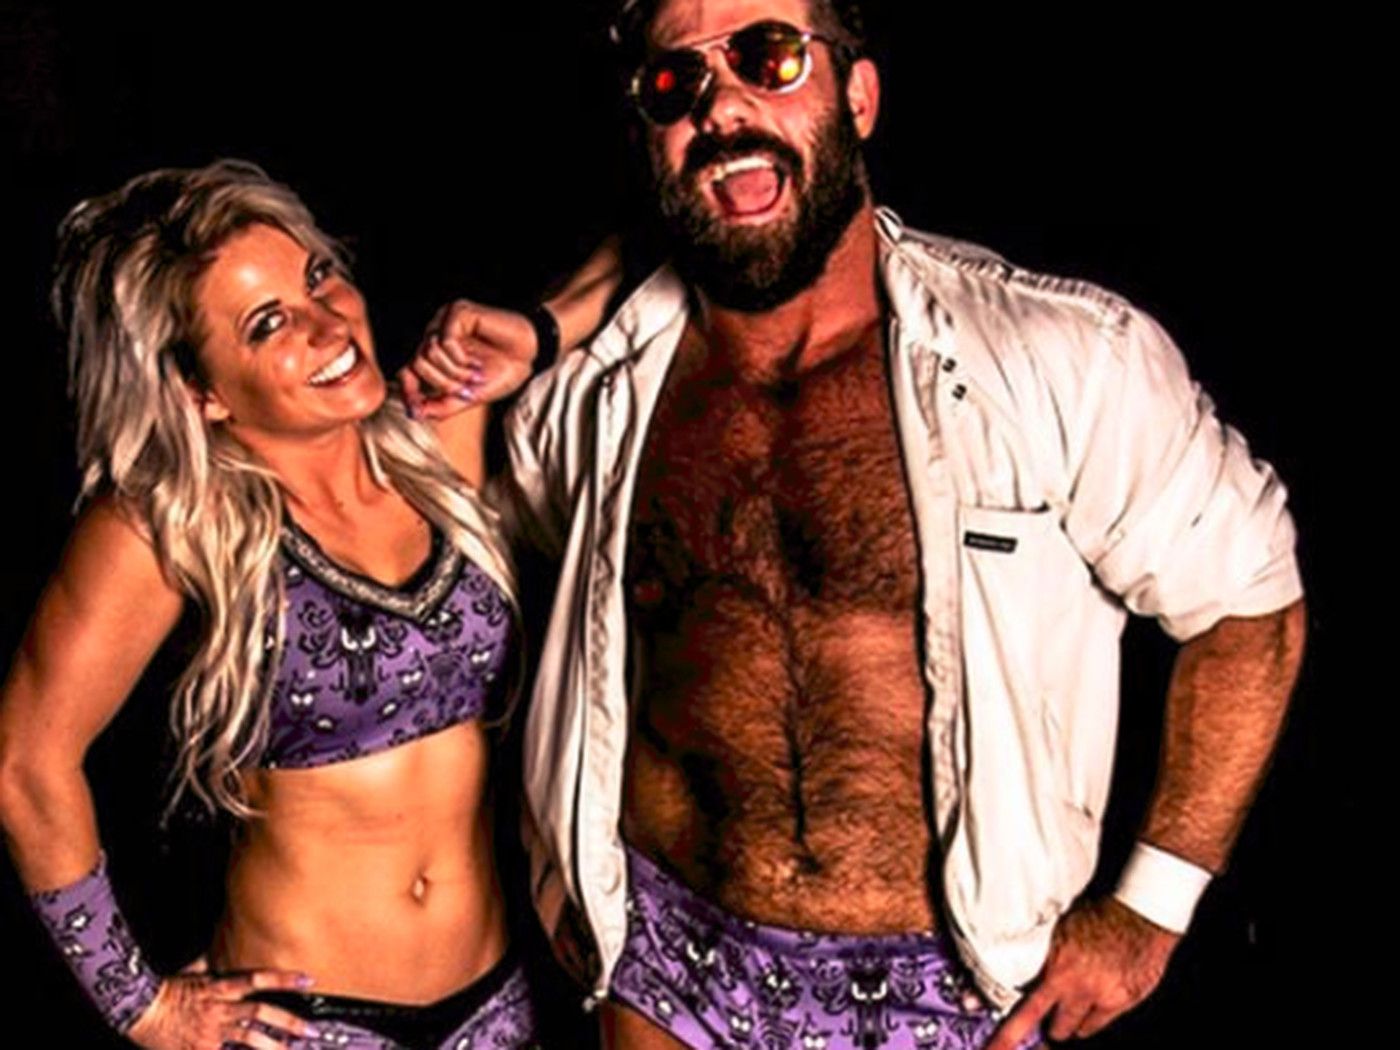 Watch Joey Ryan's goodbye to Candice LeRae after her last indie match